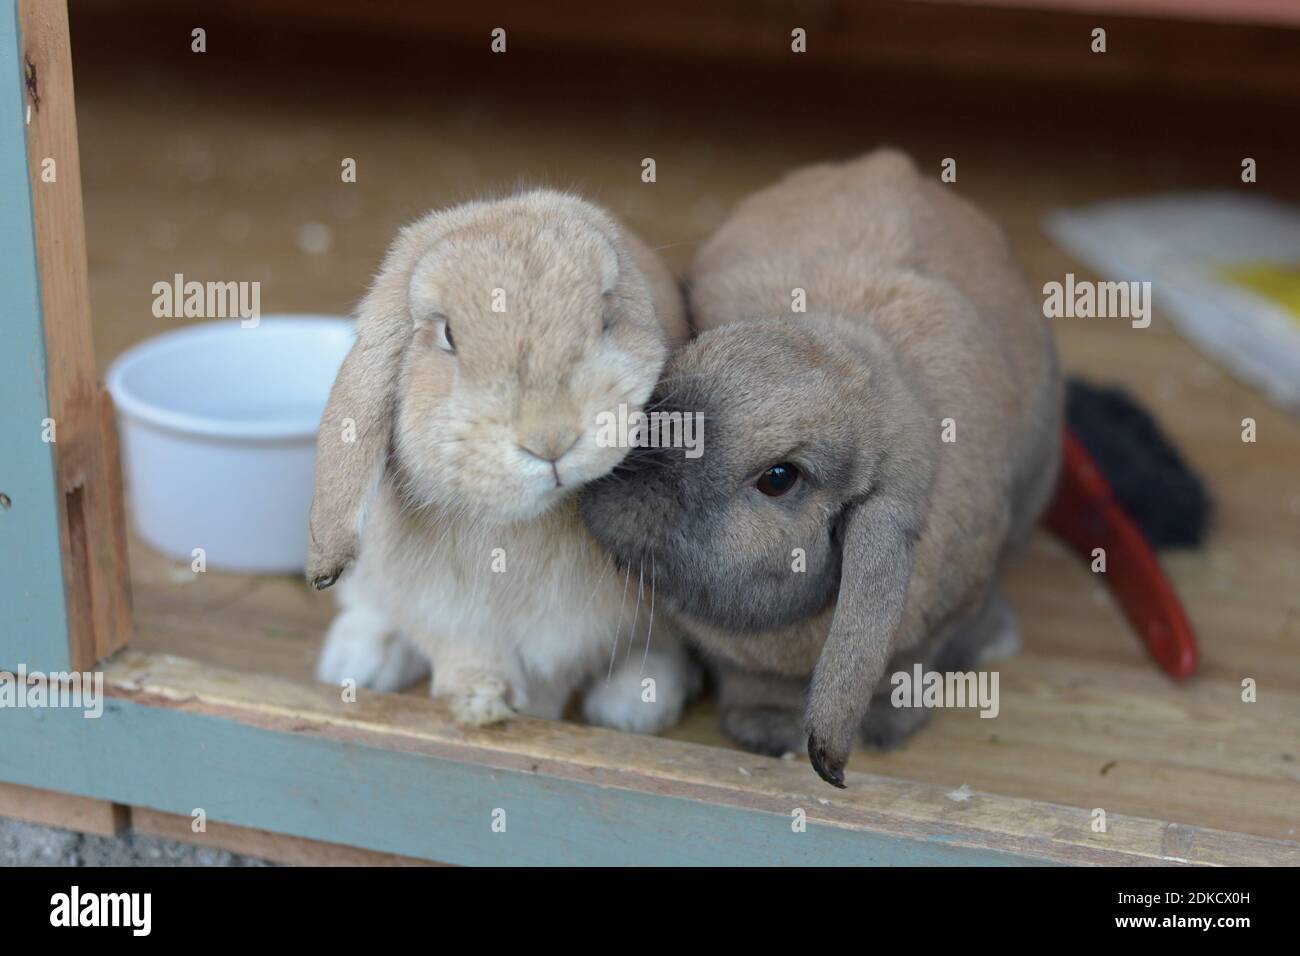 Netherlands Dwarf Lops Pet Rabbits Nudge Together As Companions Stock Photo